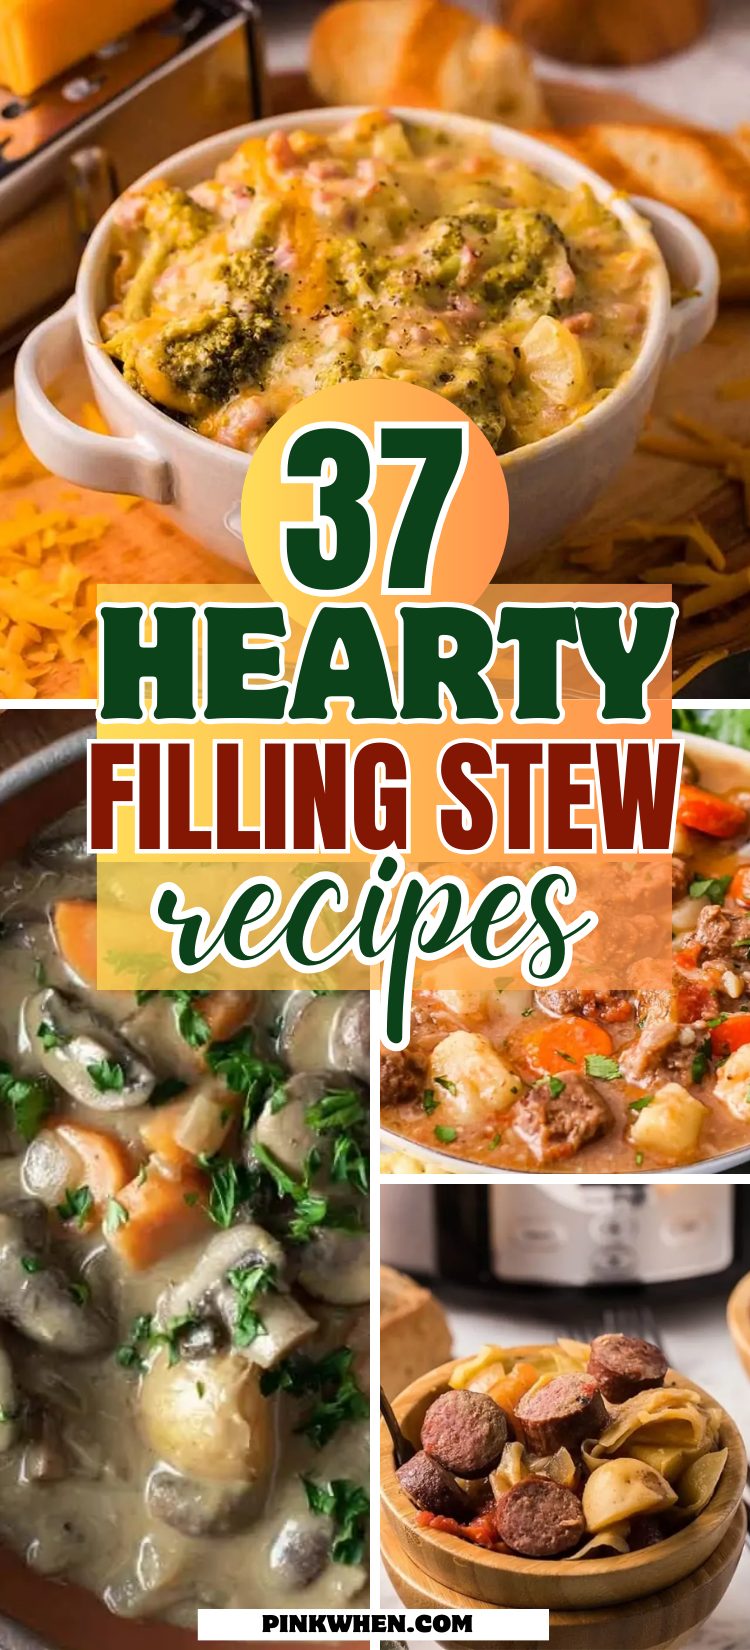 Stew-riffic Eats: 37 Hearty, Filling Stew Recipes